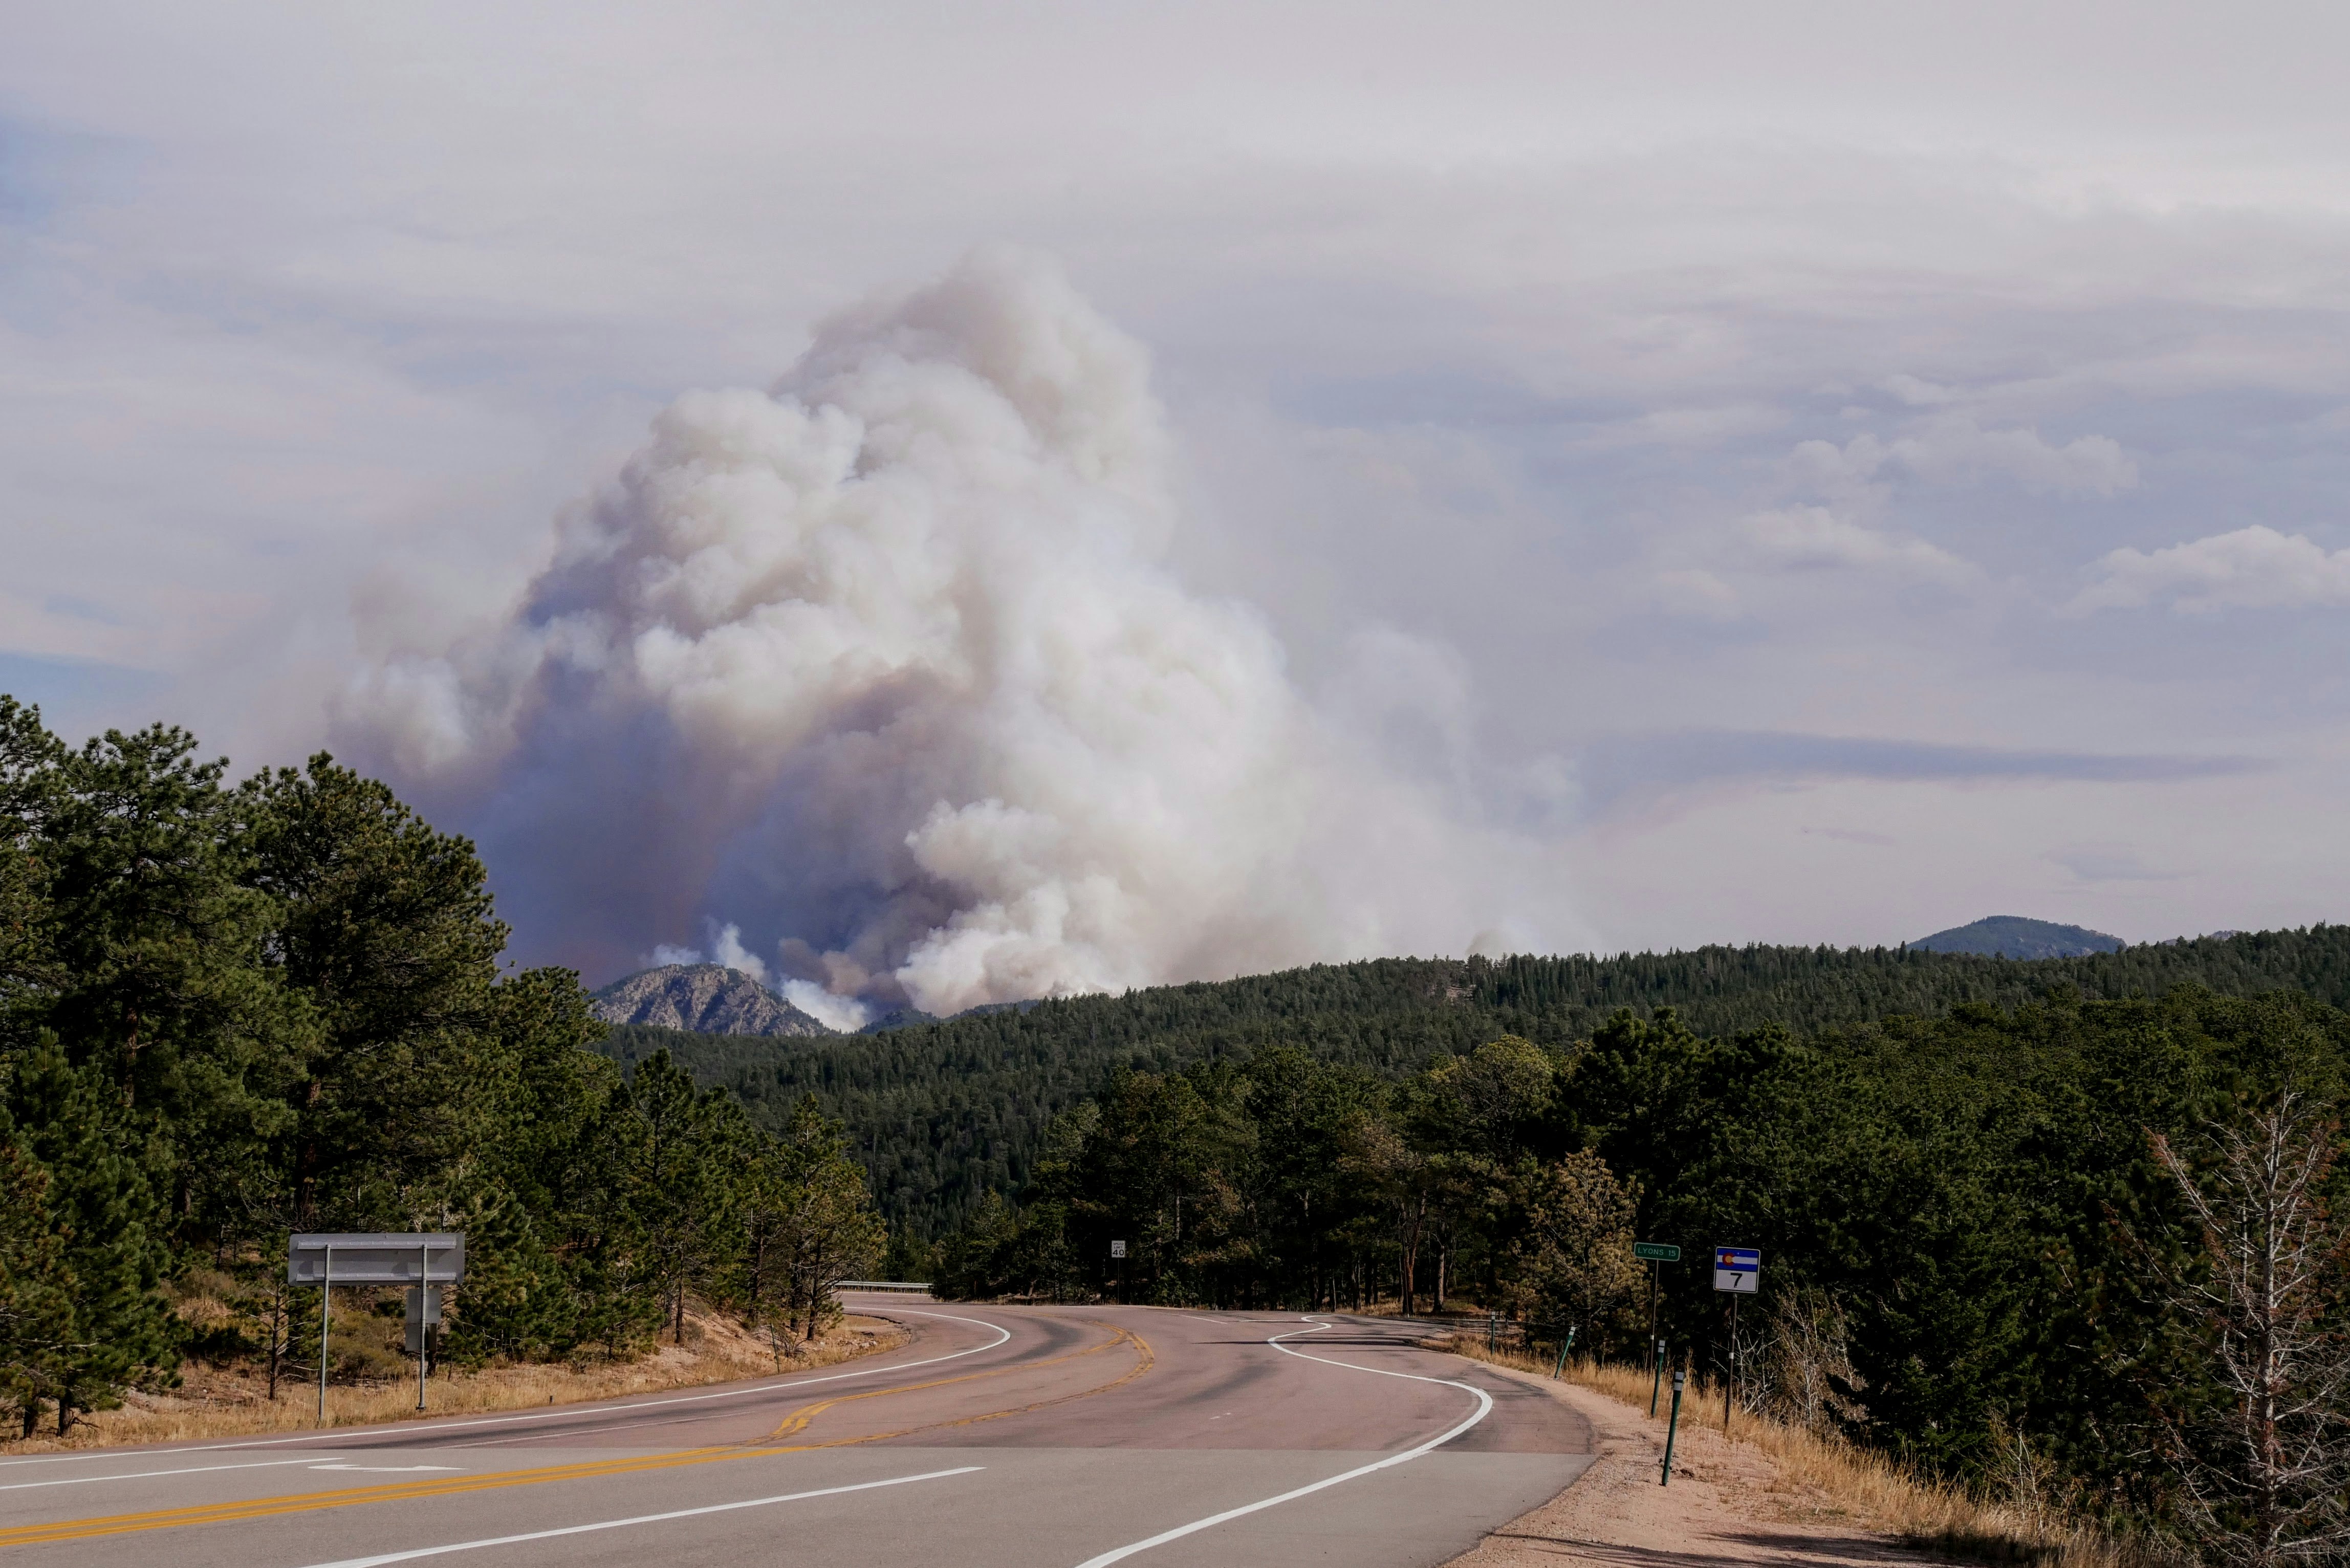 Taken on the day the calwood fire started from the peak to peak highway. Showing the smoke plume created from the fire after growing to 8000 acres within the first 5 hours and the empty road. 